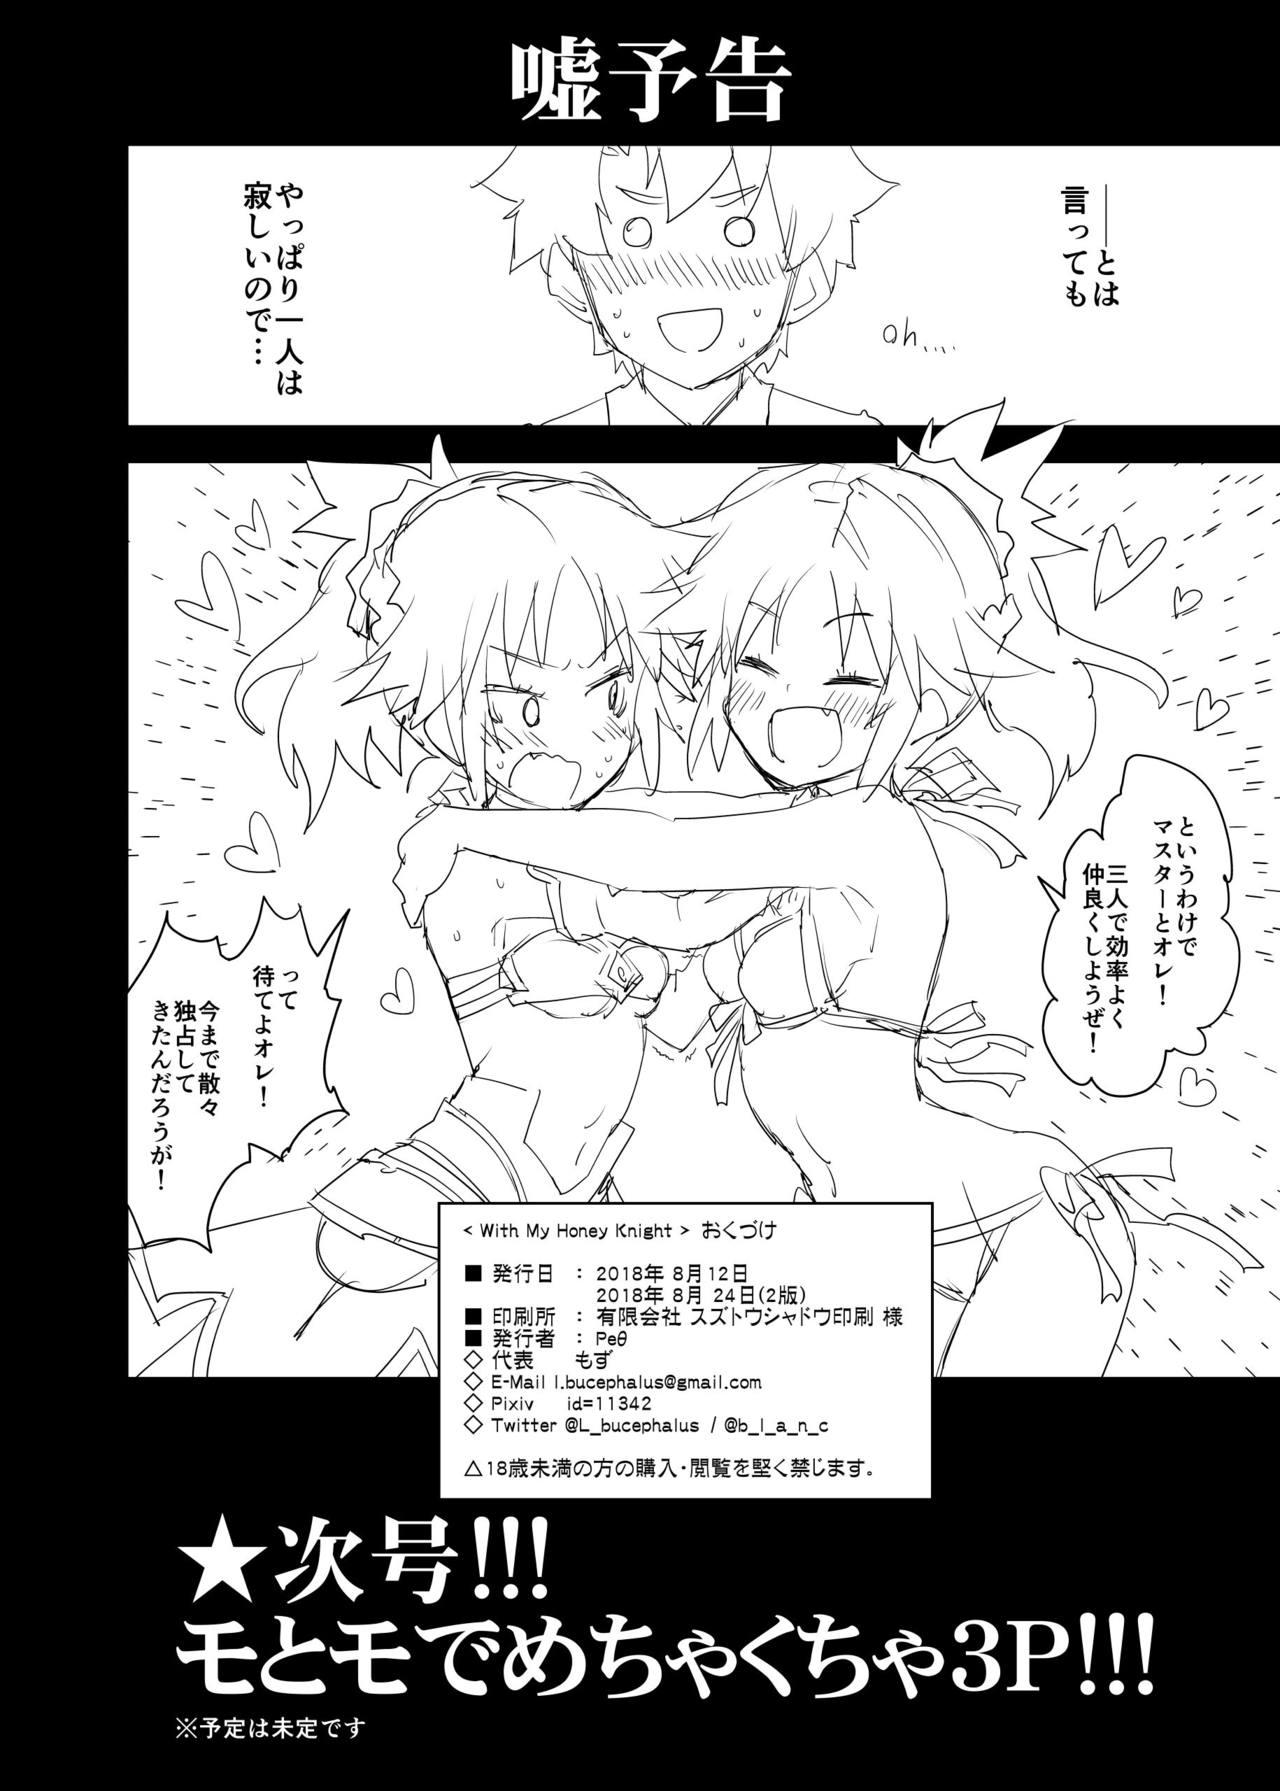 Gay Bukkakeboys With My Honey Knight - Fate grand order Hardcore Porn - Page 29